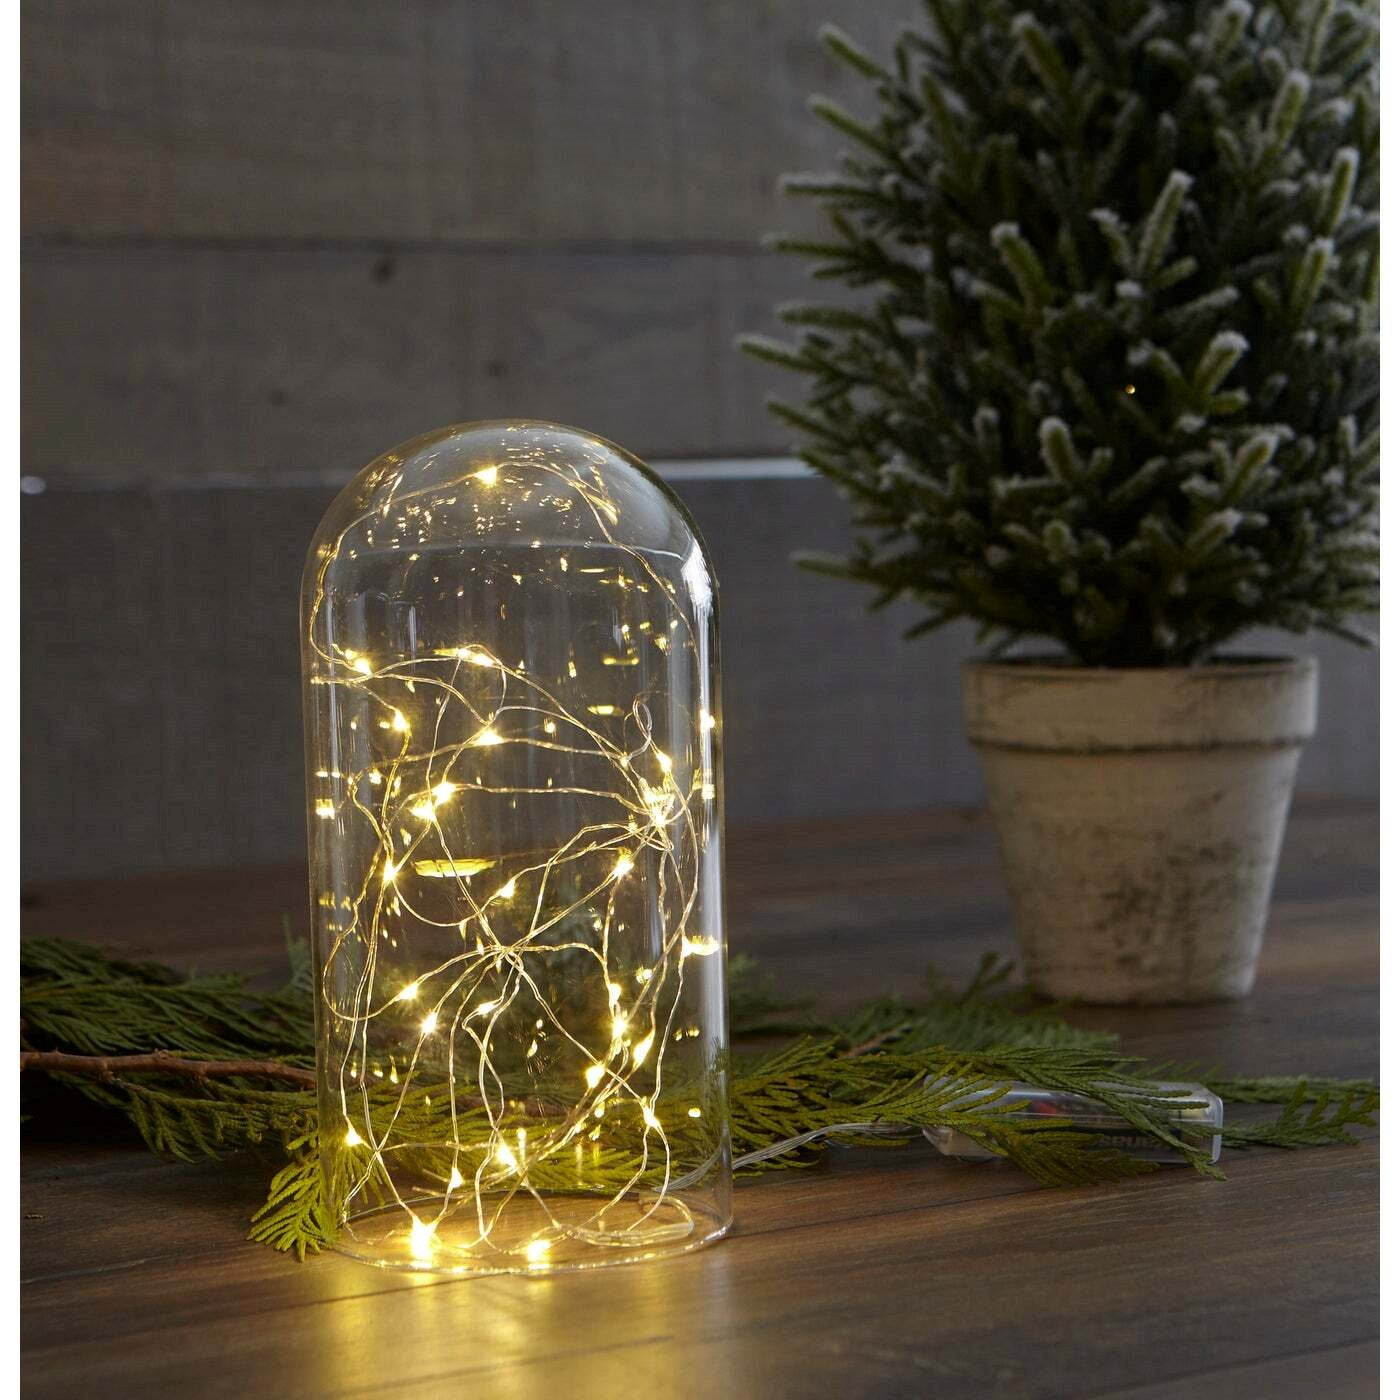 Silver wired led string lights